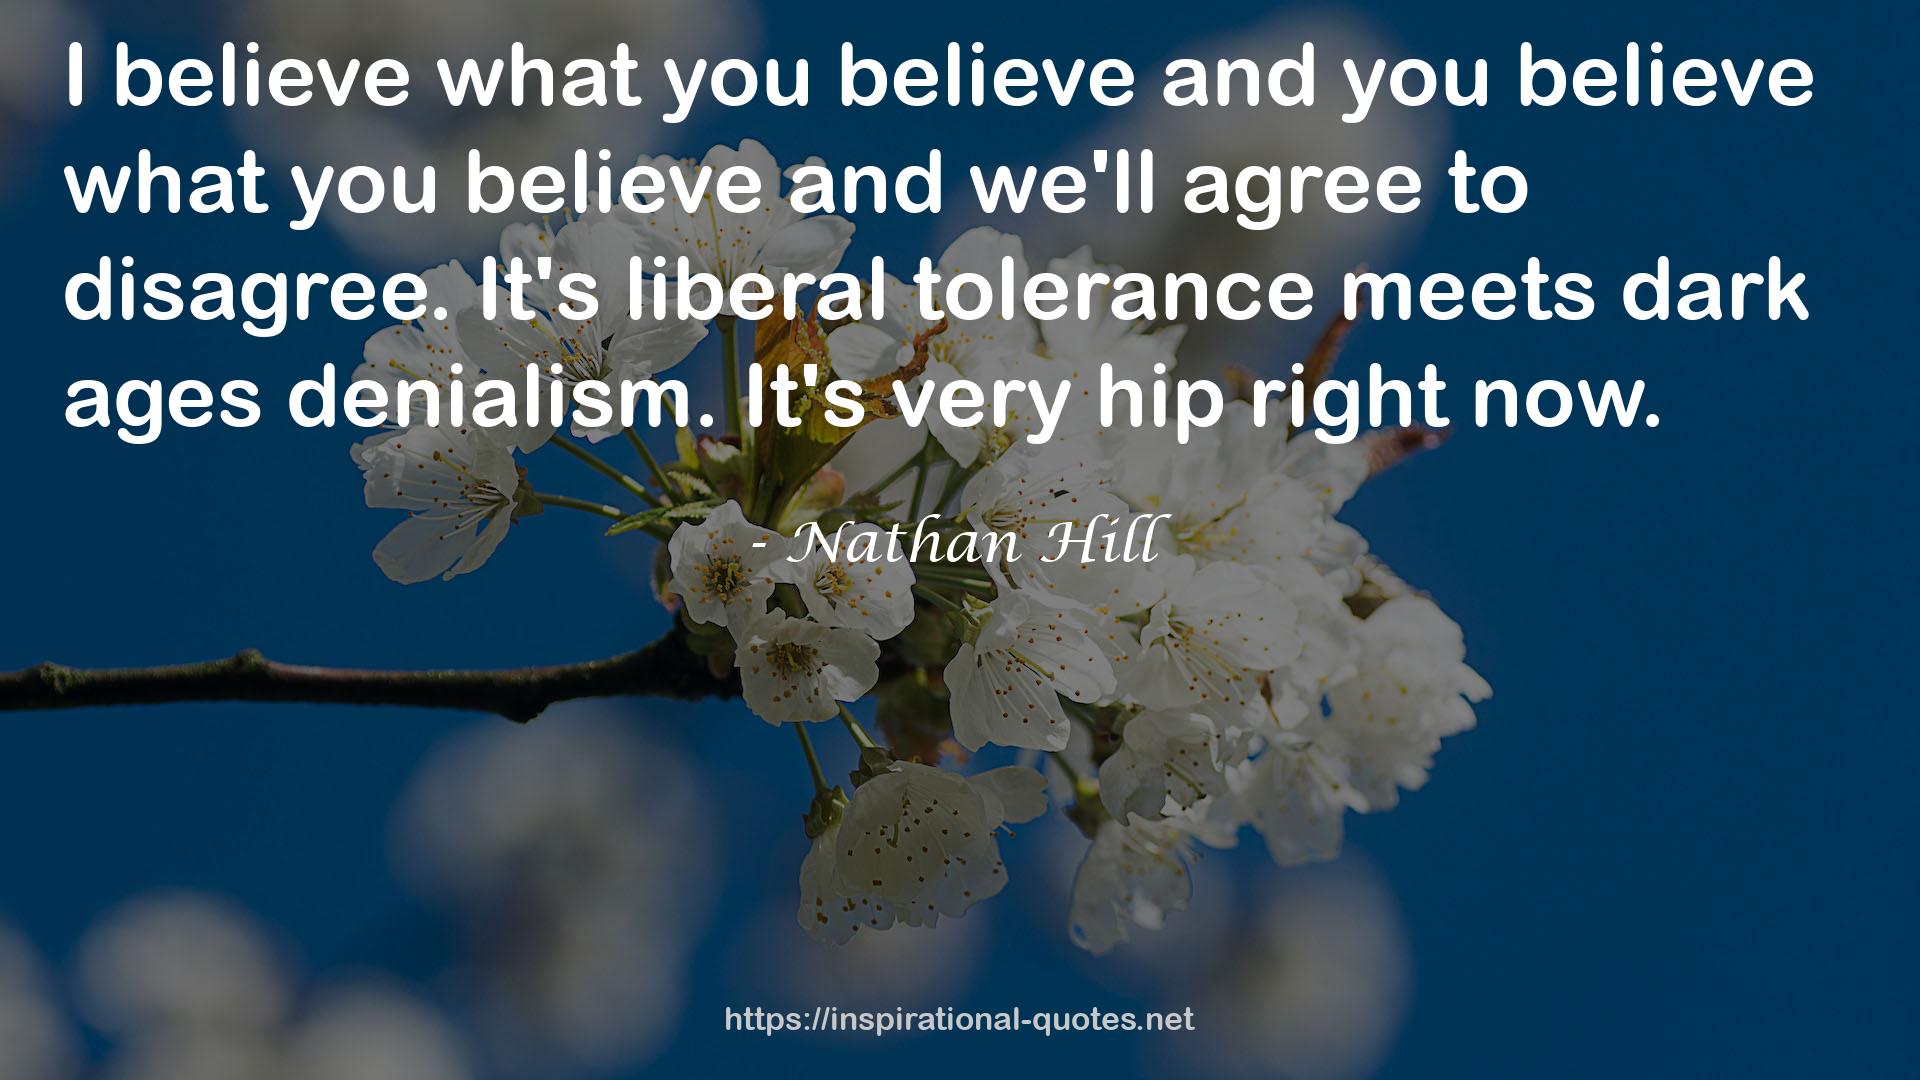 Nathan Hill QUOTES